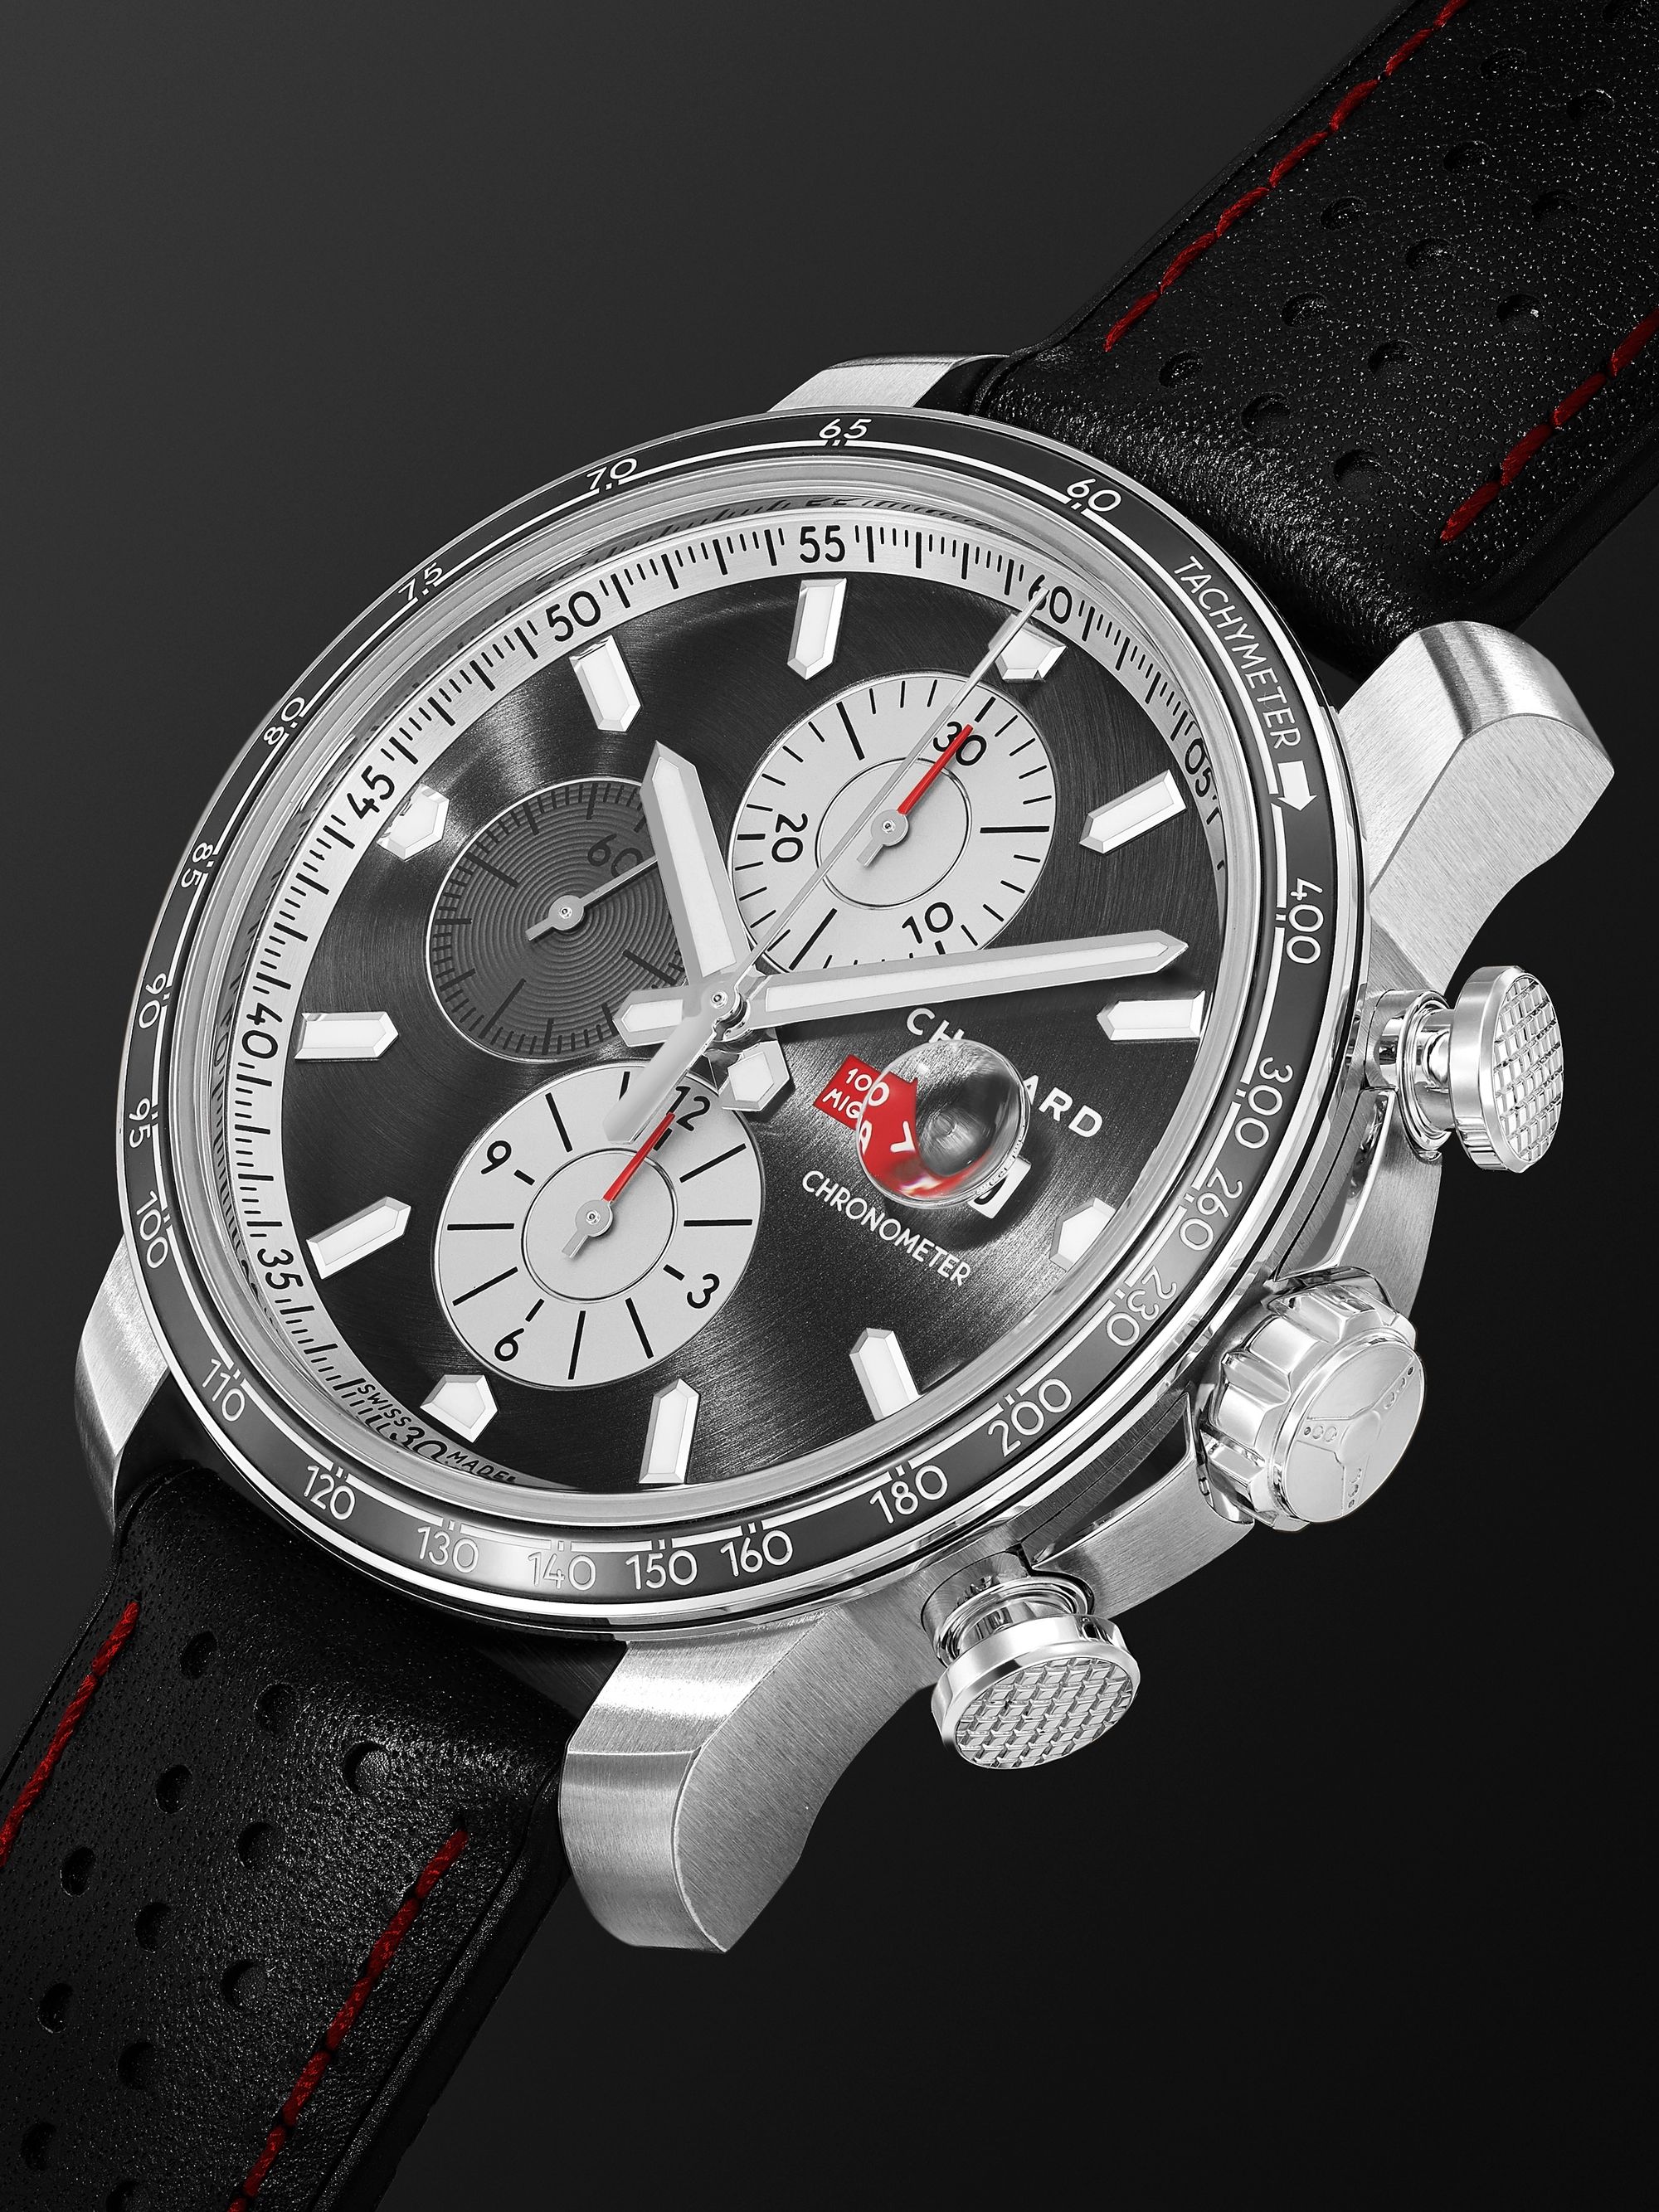 CHOPARD Mille Miglia 2021 Race Edition Limited Edition Automatic Chronograph 44mm Stainless Steel and Leather Watch, Ref. No.